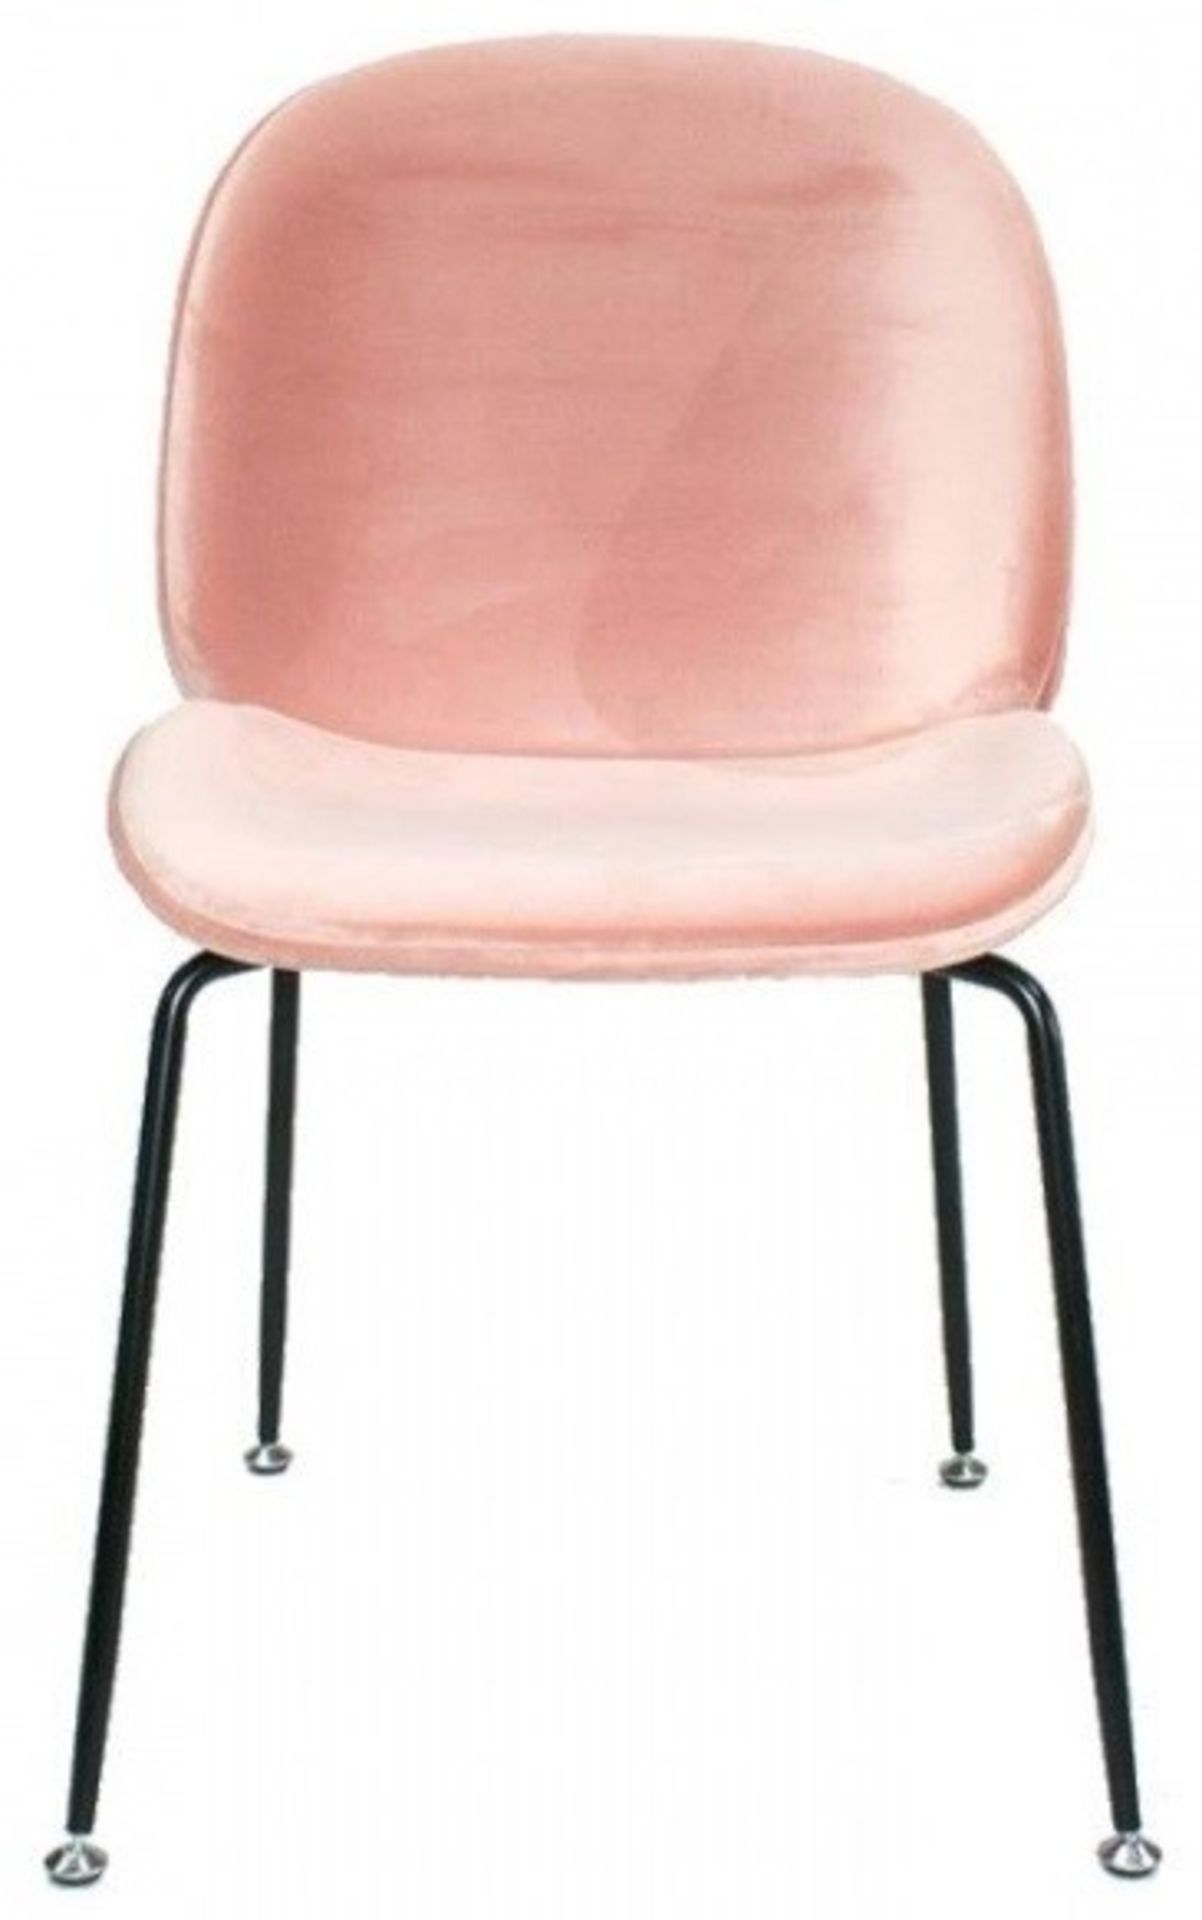 4 x GRACE Upholstered Contemporary Dining Chairs In PINK Velvet - Dimensions: W48 x D50 x H85 cm - - Image 3 of 3